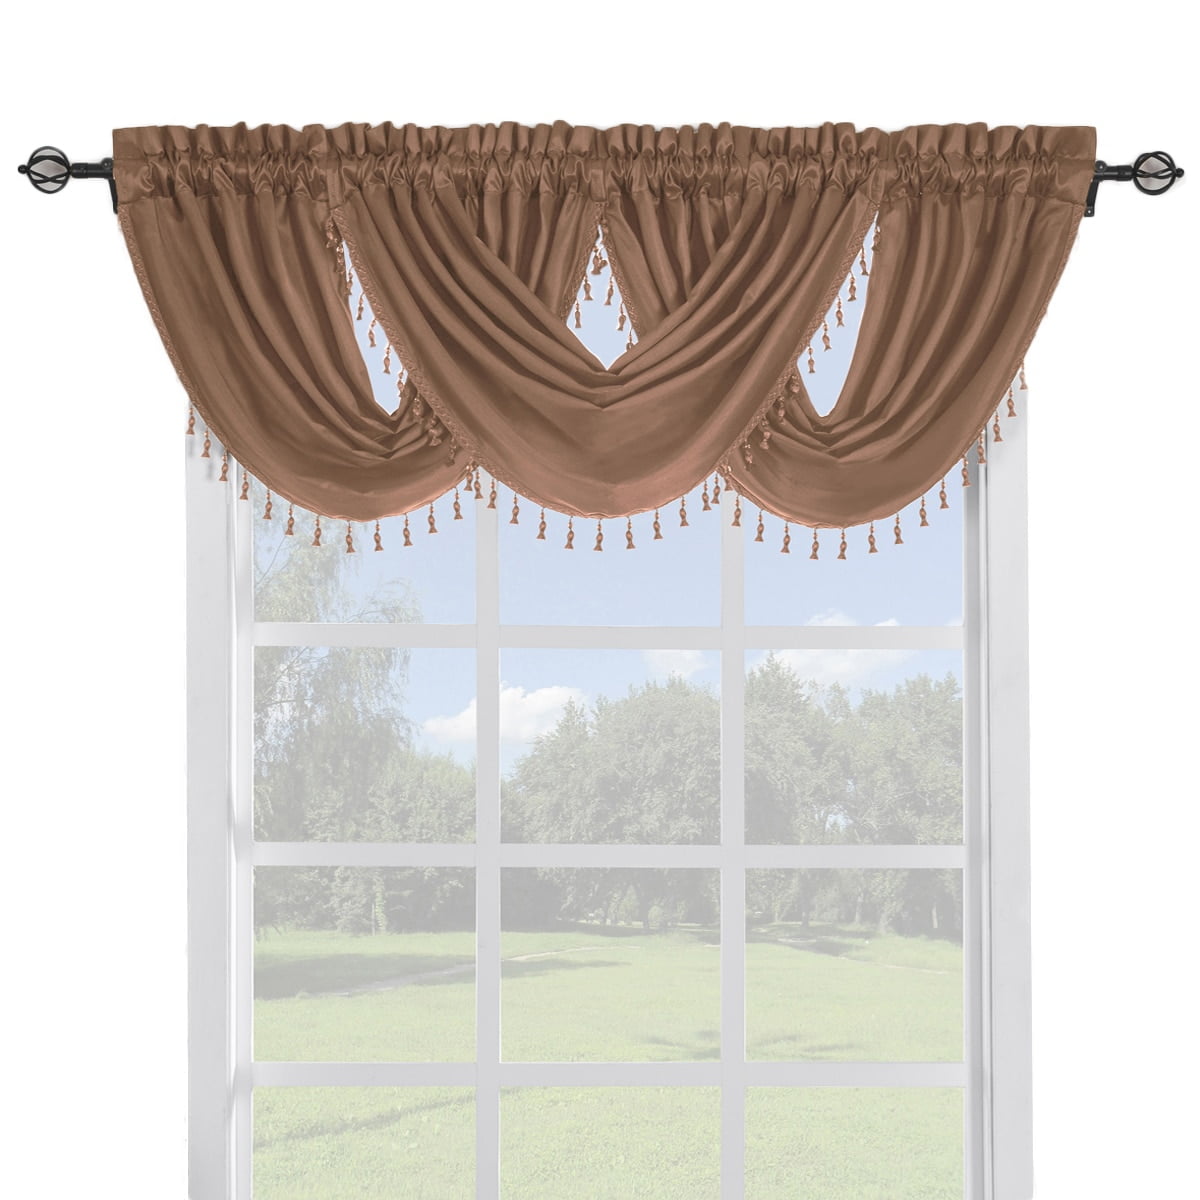 Hyatt window treatment window curtain Panel OR valance 14 color SOLD SEPARATE 